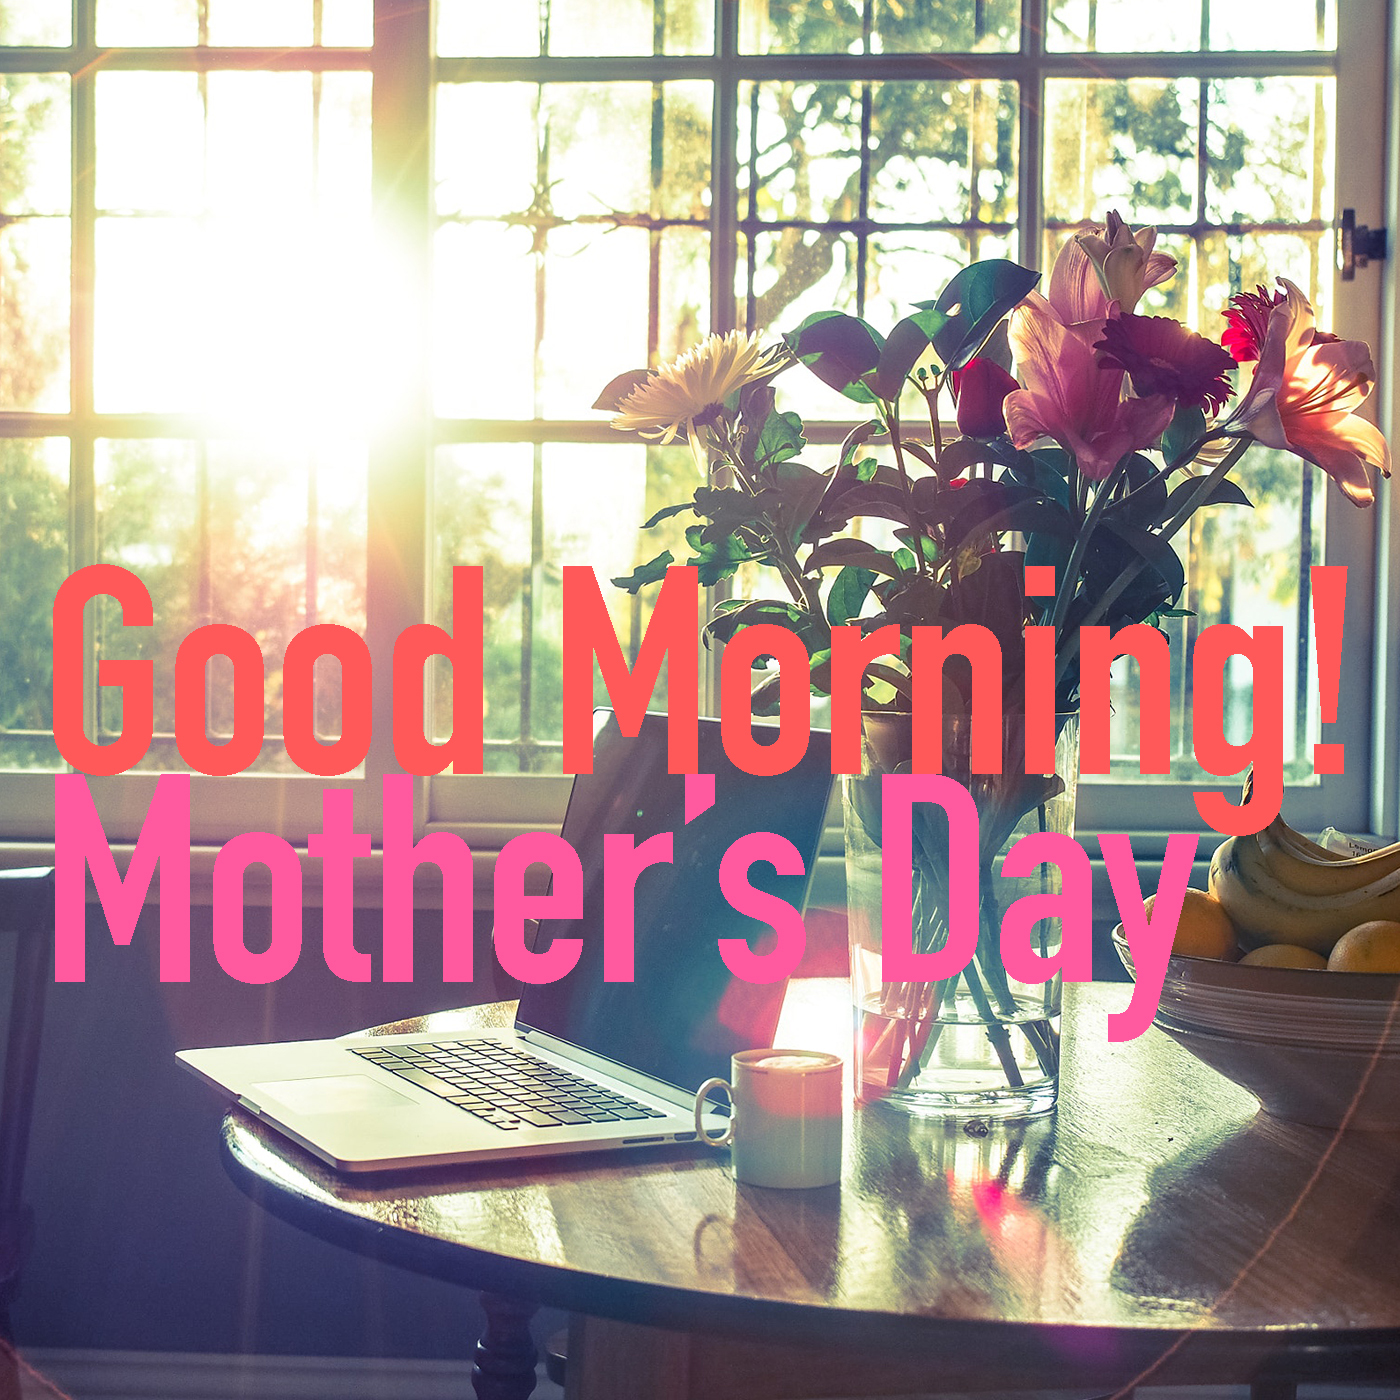 Good Morning! Mother's Day